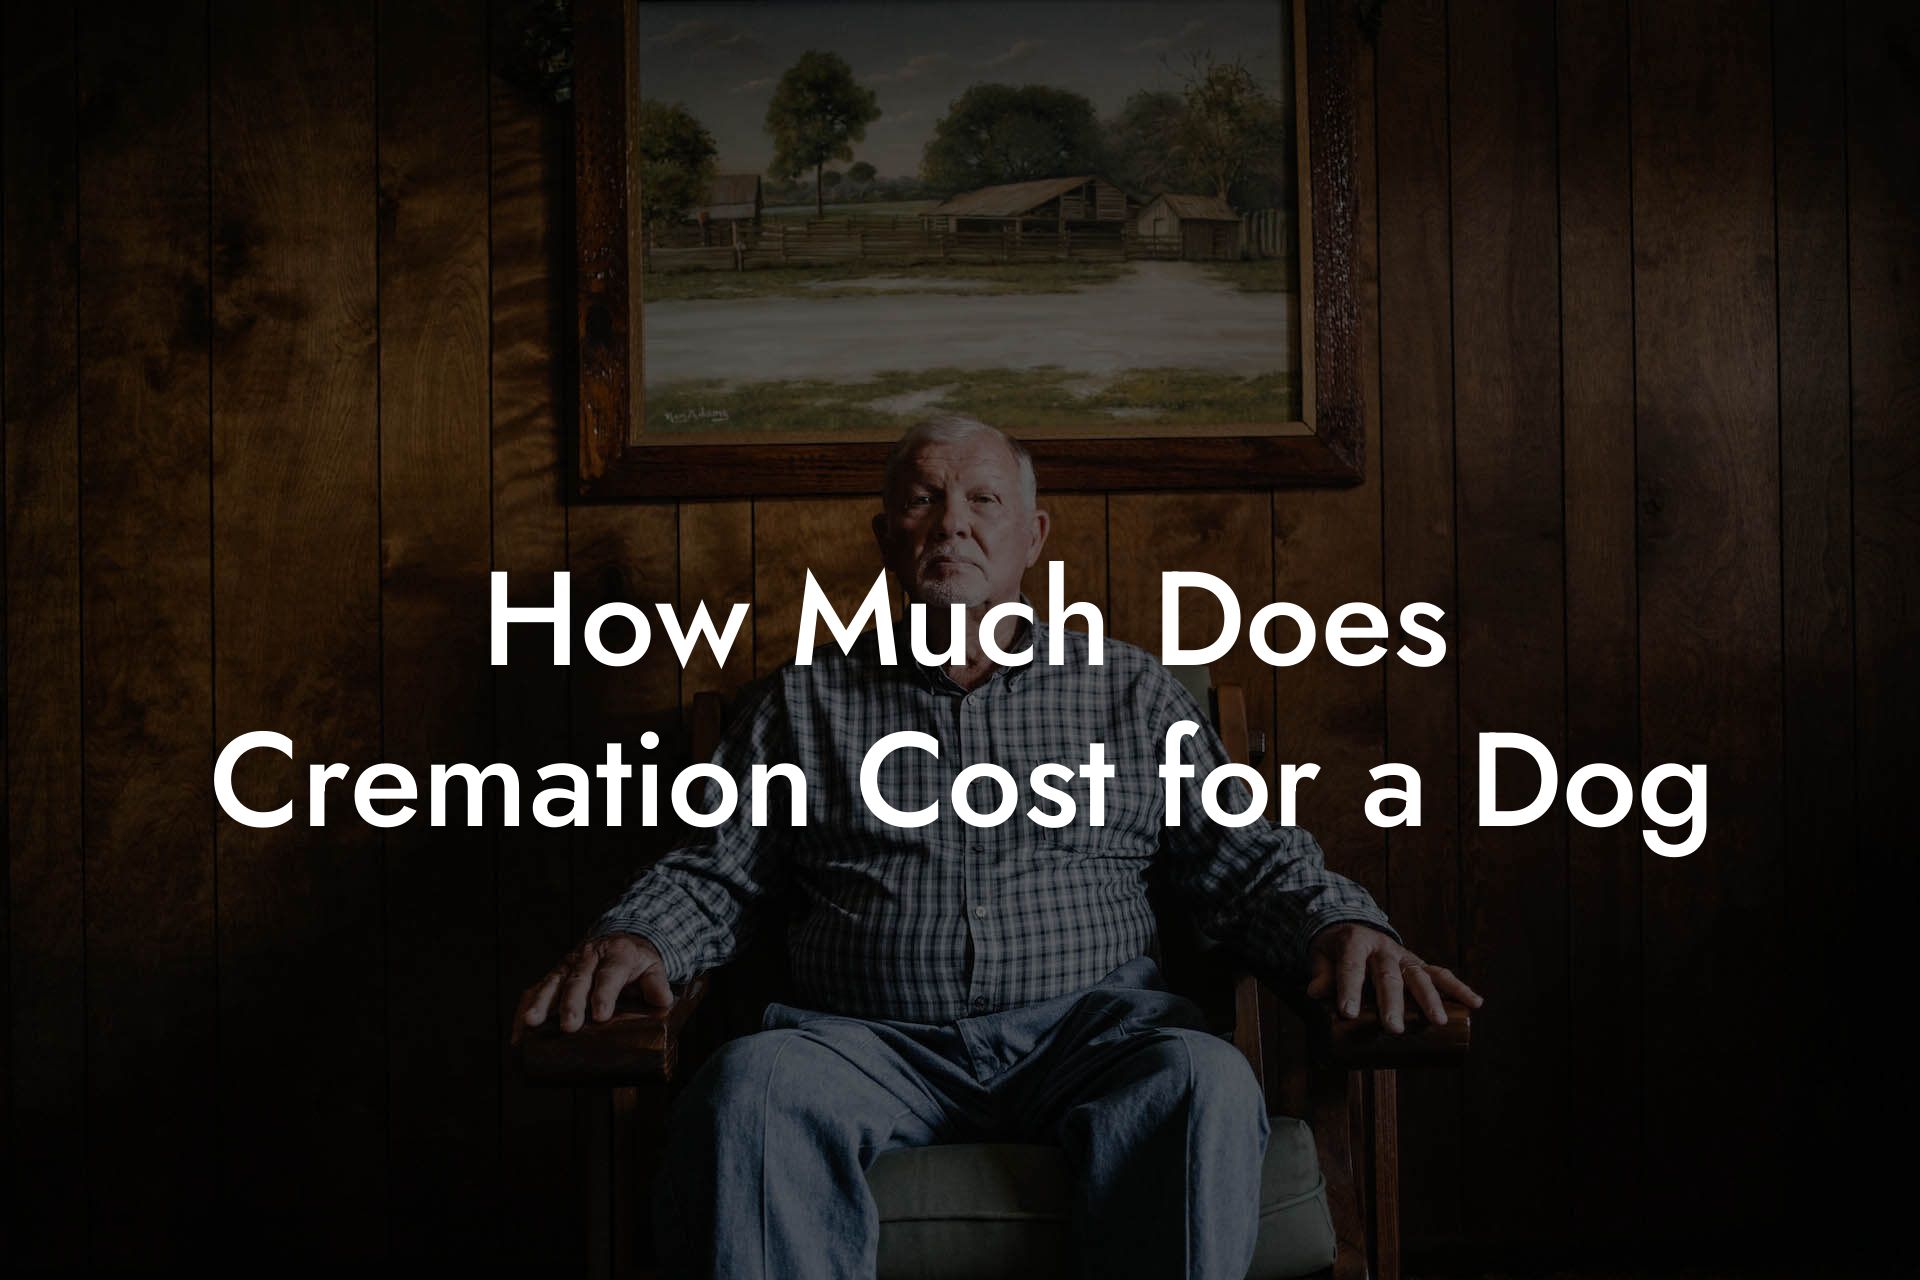 How Much Does Cremation Cost for a Dog